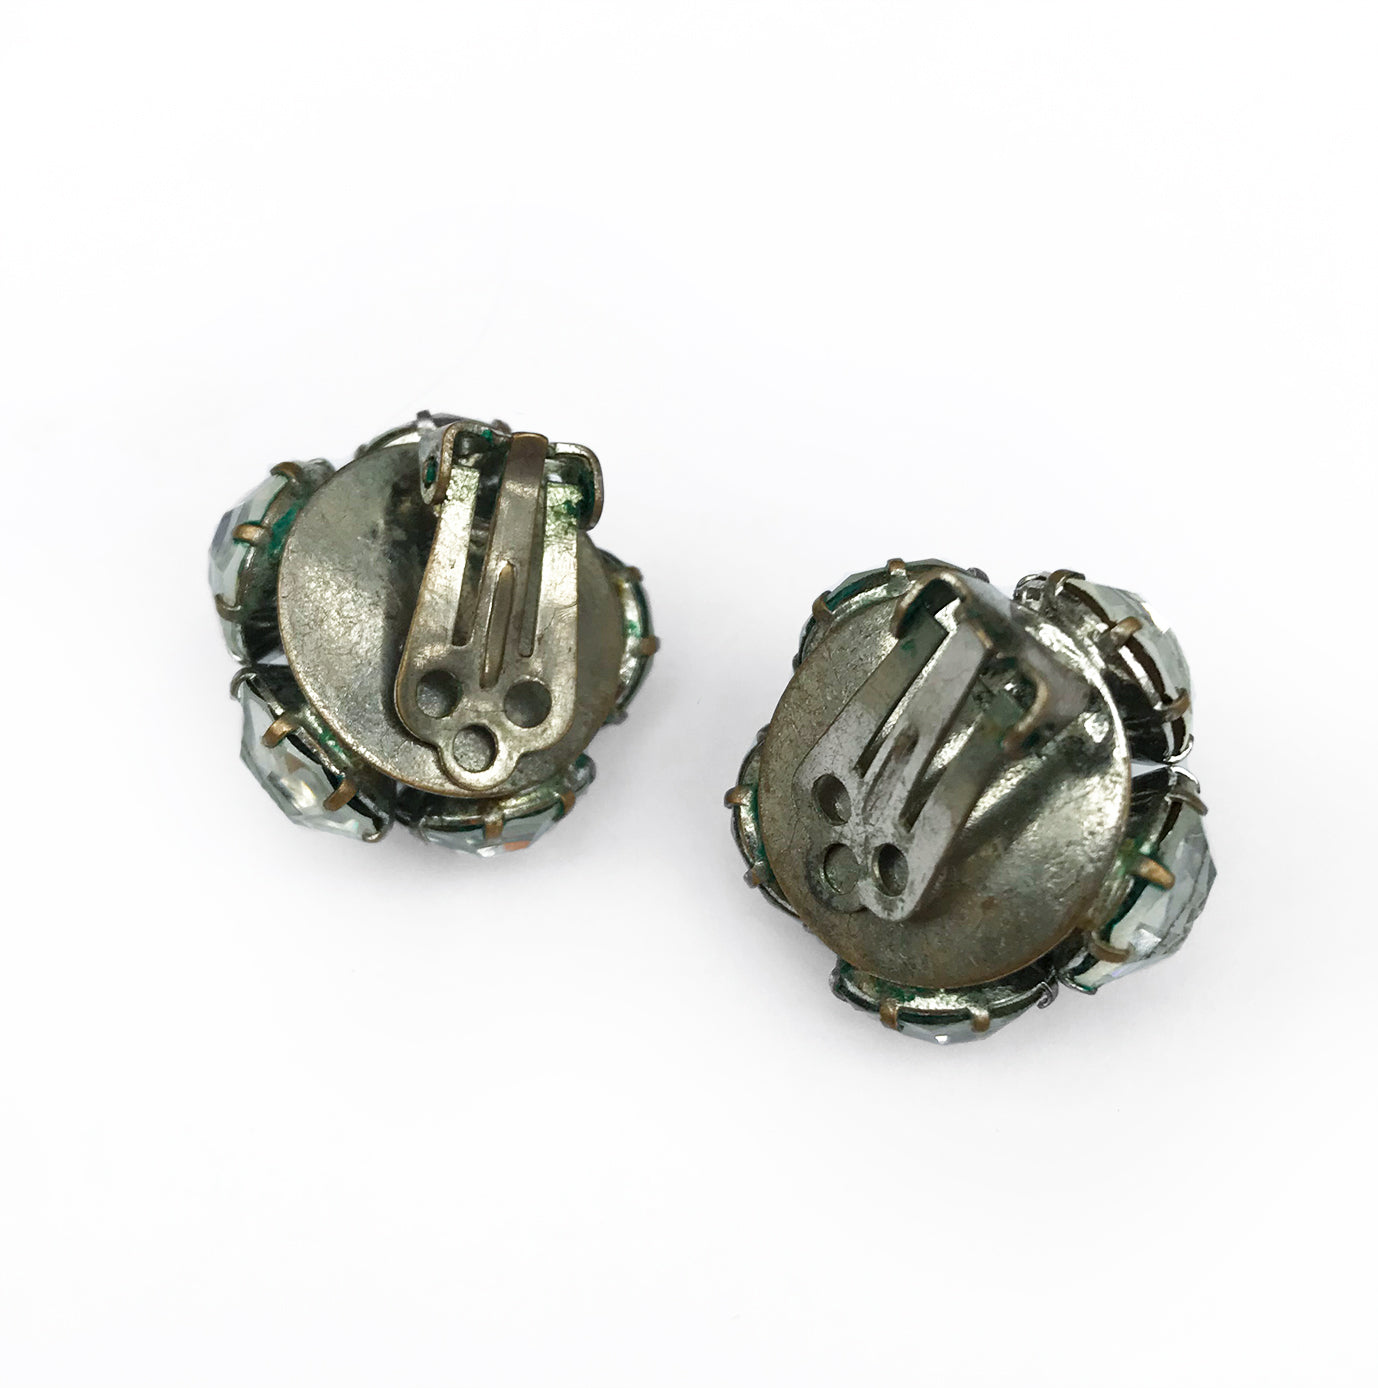 Large Vintage Faceted Round Clip On Rhinestones. Find this and other Vintage jewellery for sale at Intovintage.co.uk.